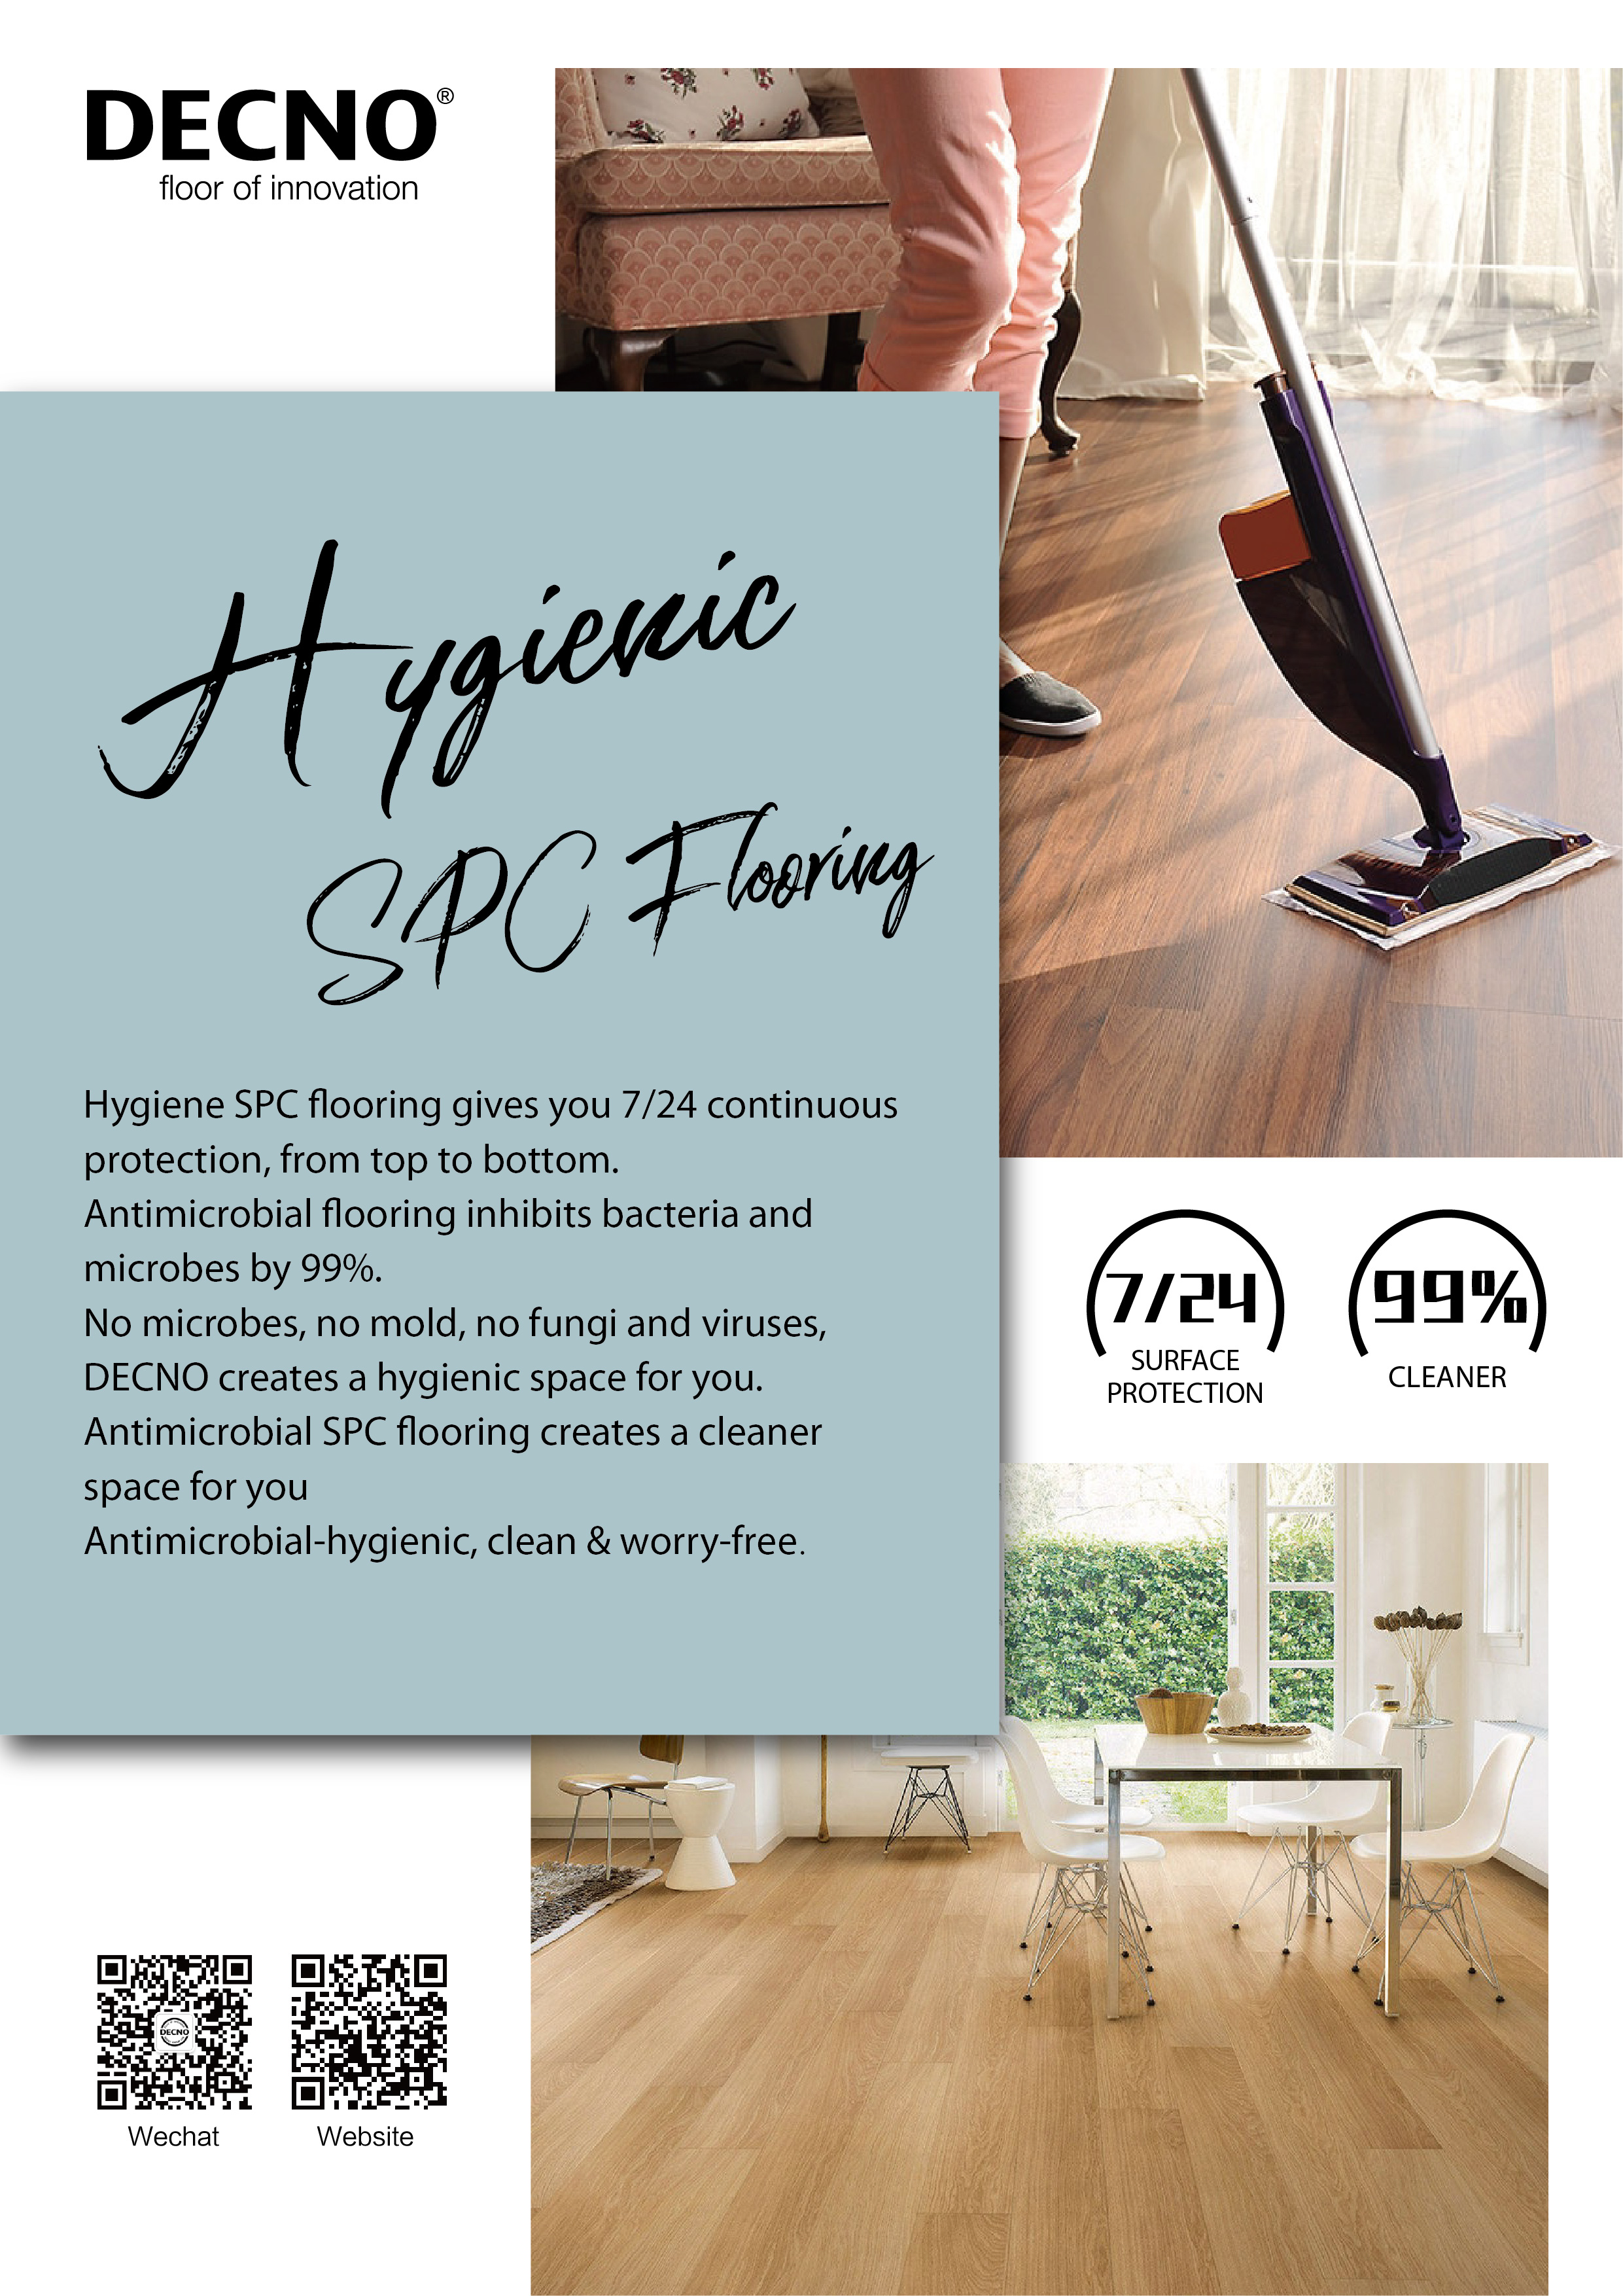 Begin Your Day with DECNO Hygienic SPC Flooring